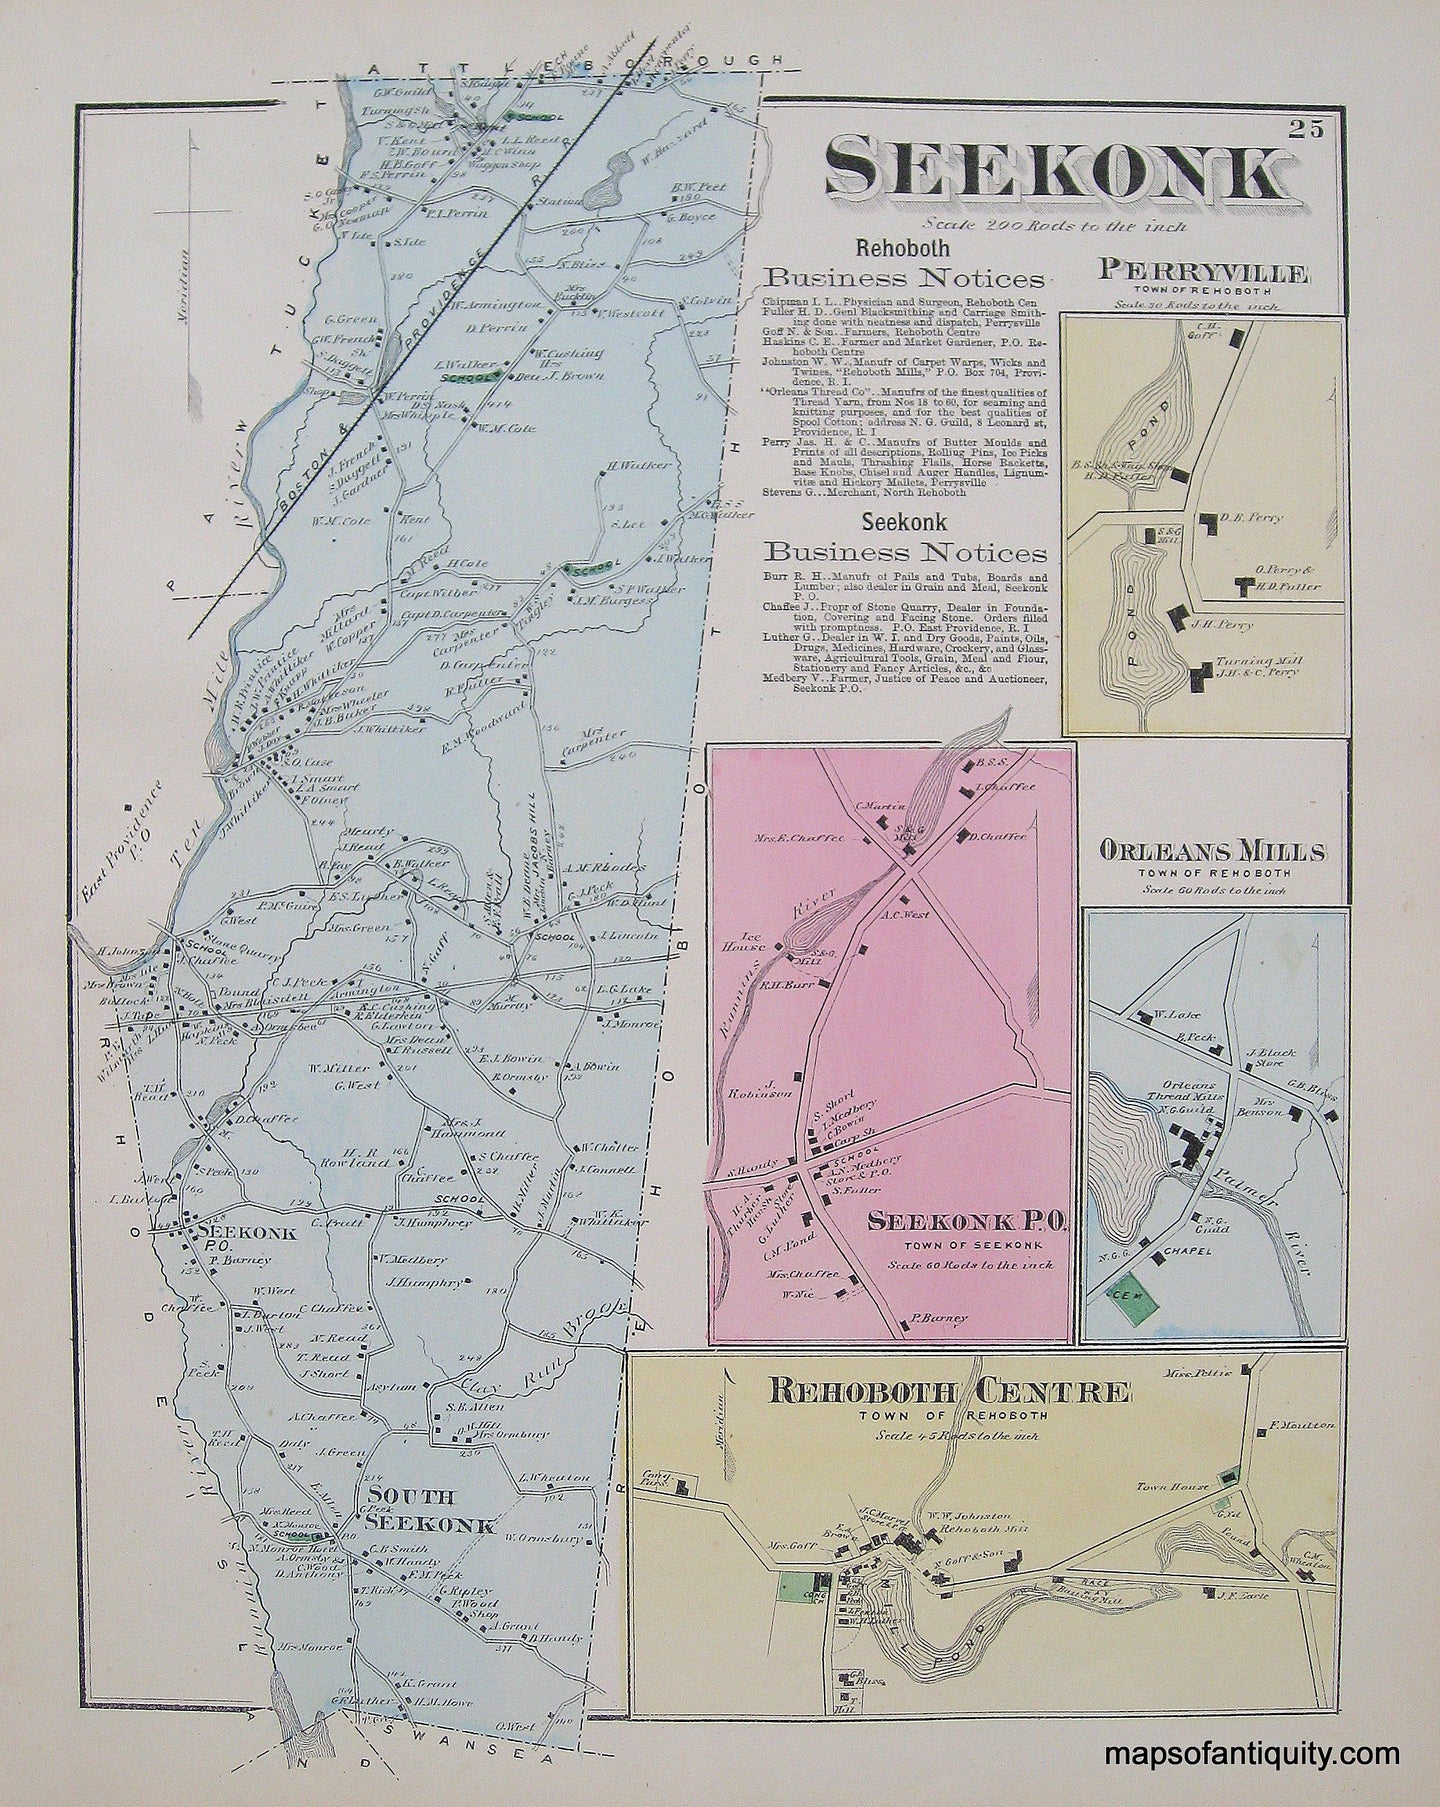 Antique-Hand-Colored-Map-Seekonk-Perryville-Orleans-Mills-Rehoboth-Centre-p.-25-(MA)-Massachusetts-Bristol-County-1871-Beers-Maps-Of-Antiquity